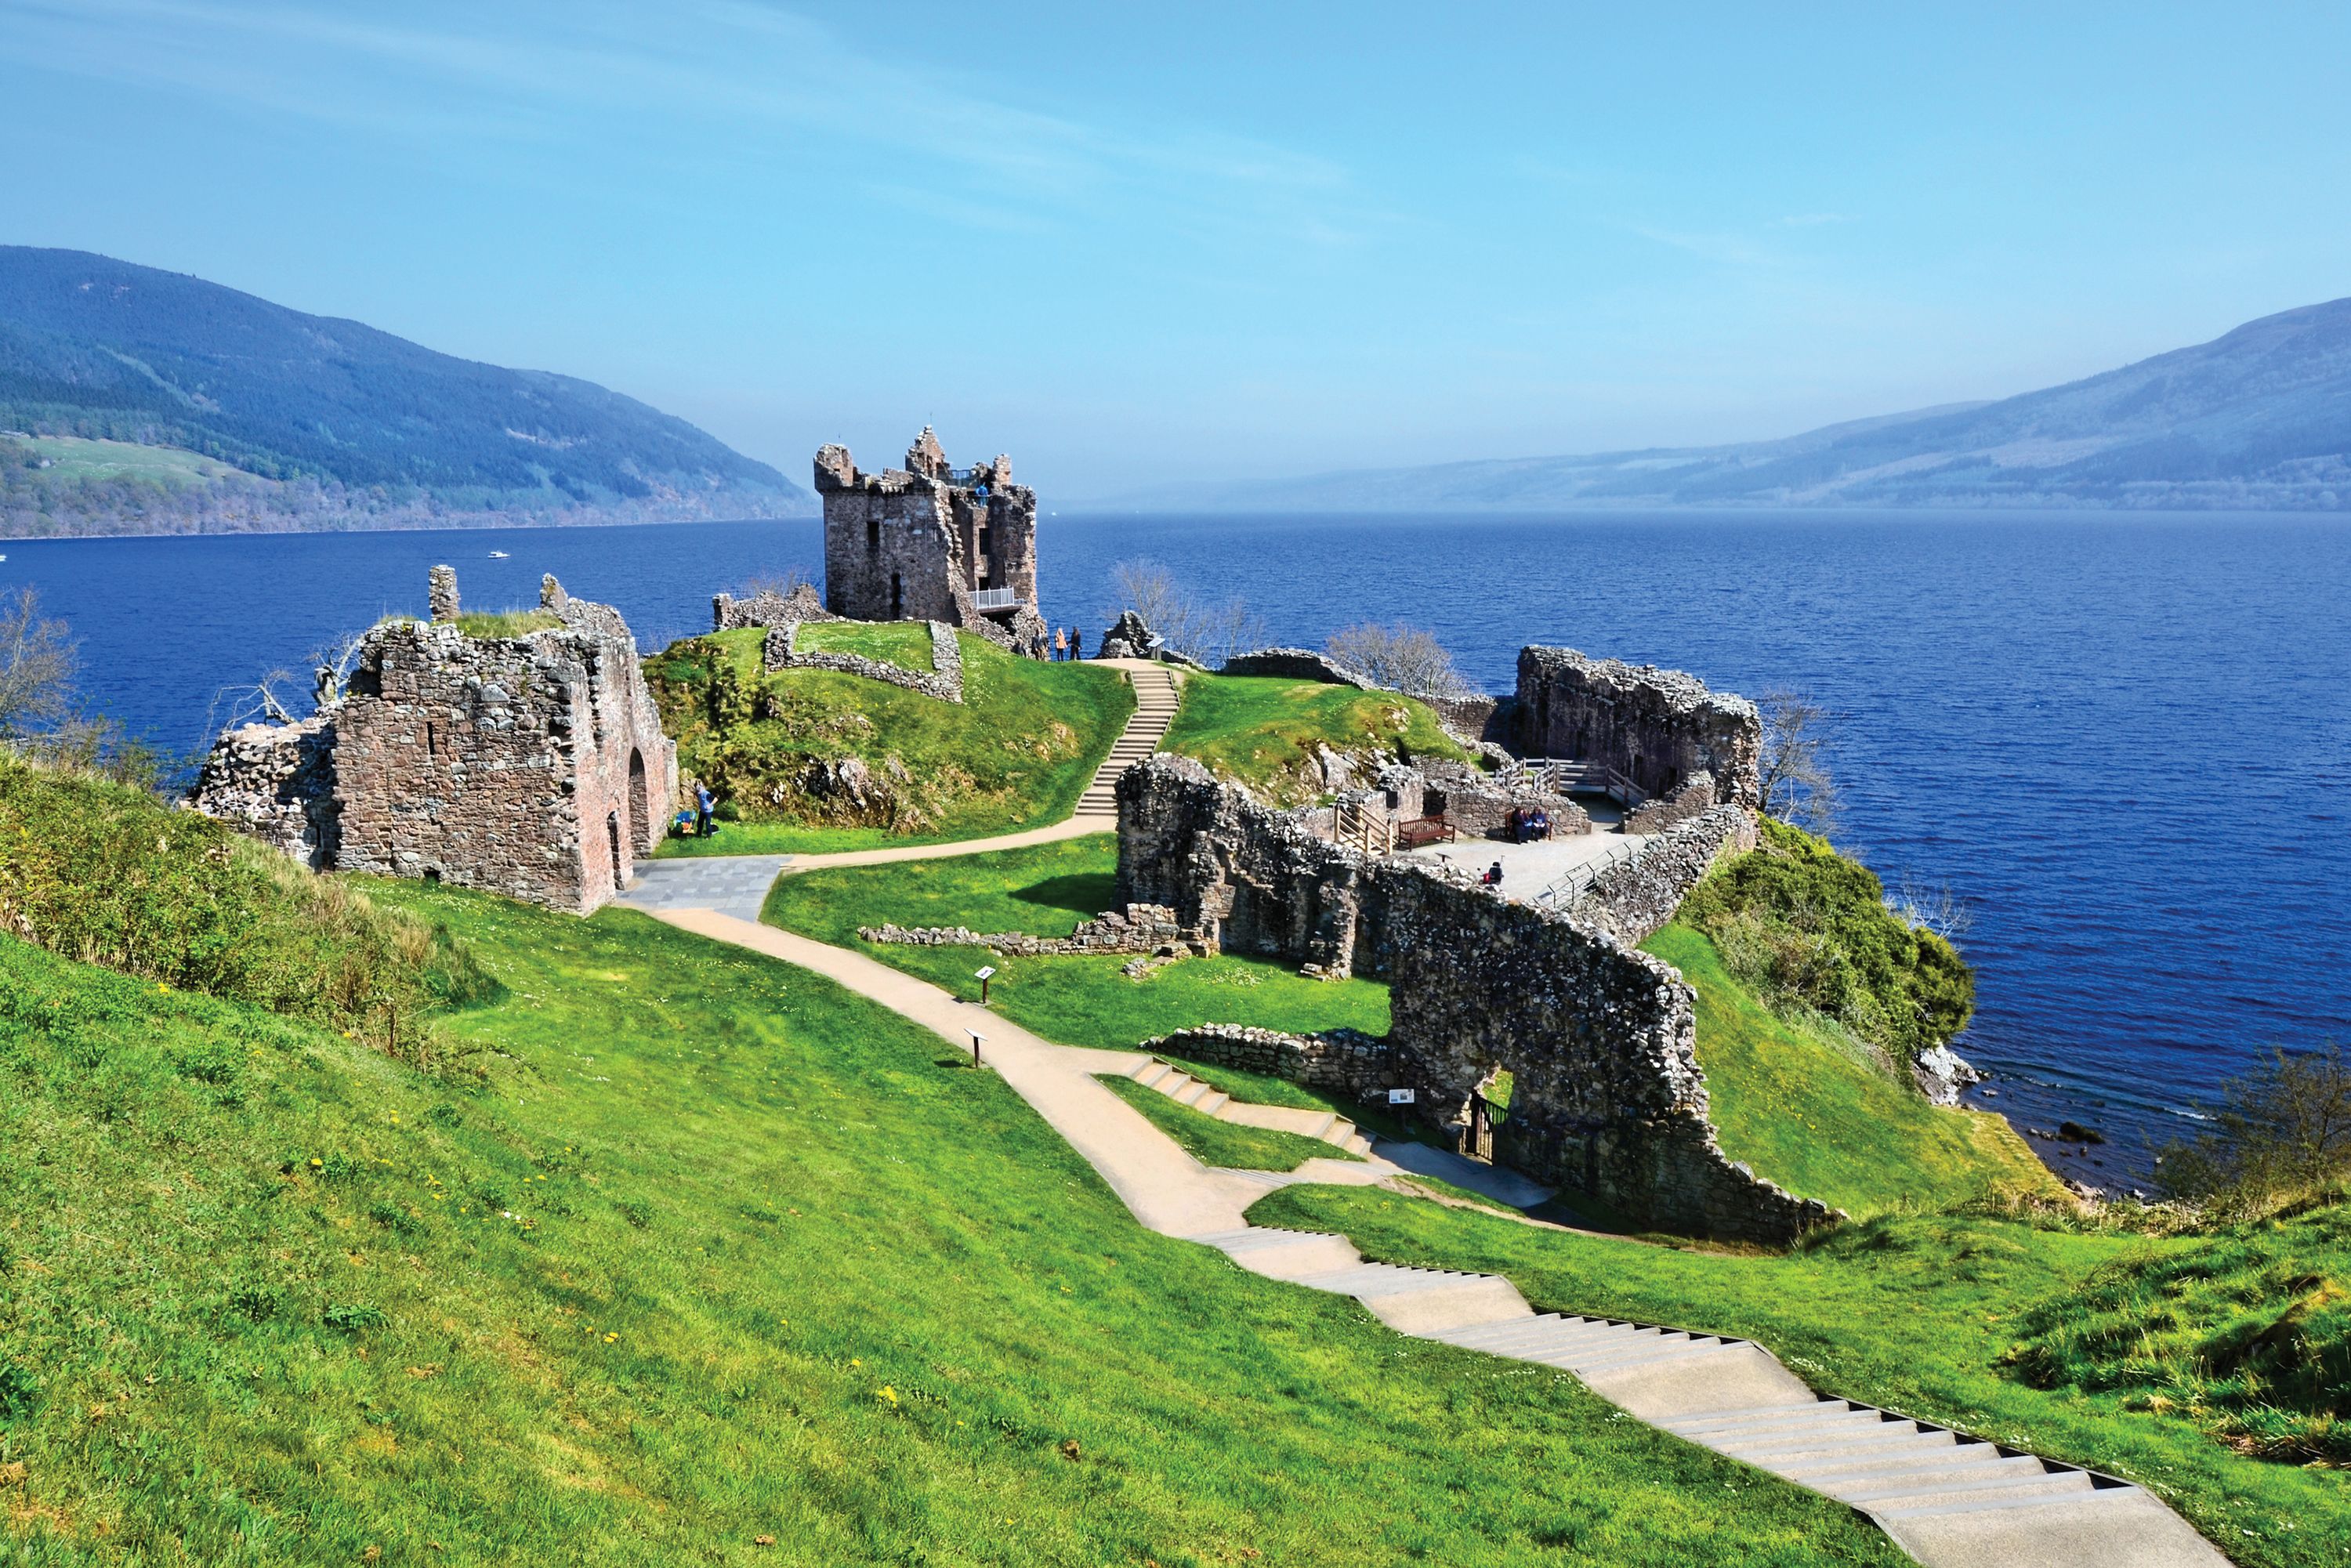 Lord of the Glens – 7 day cruise (Voyage through the Heart of Scotland)